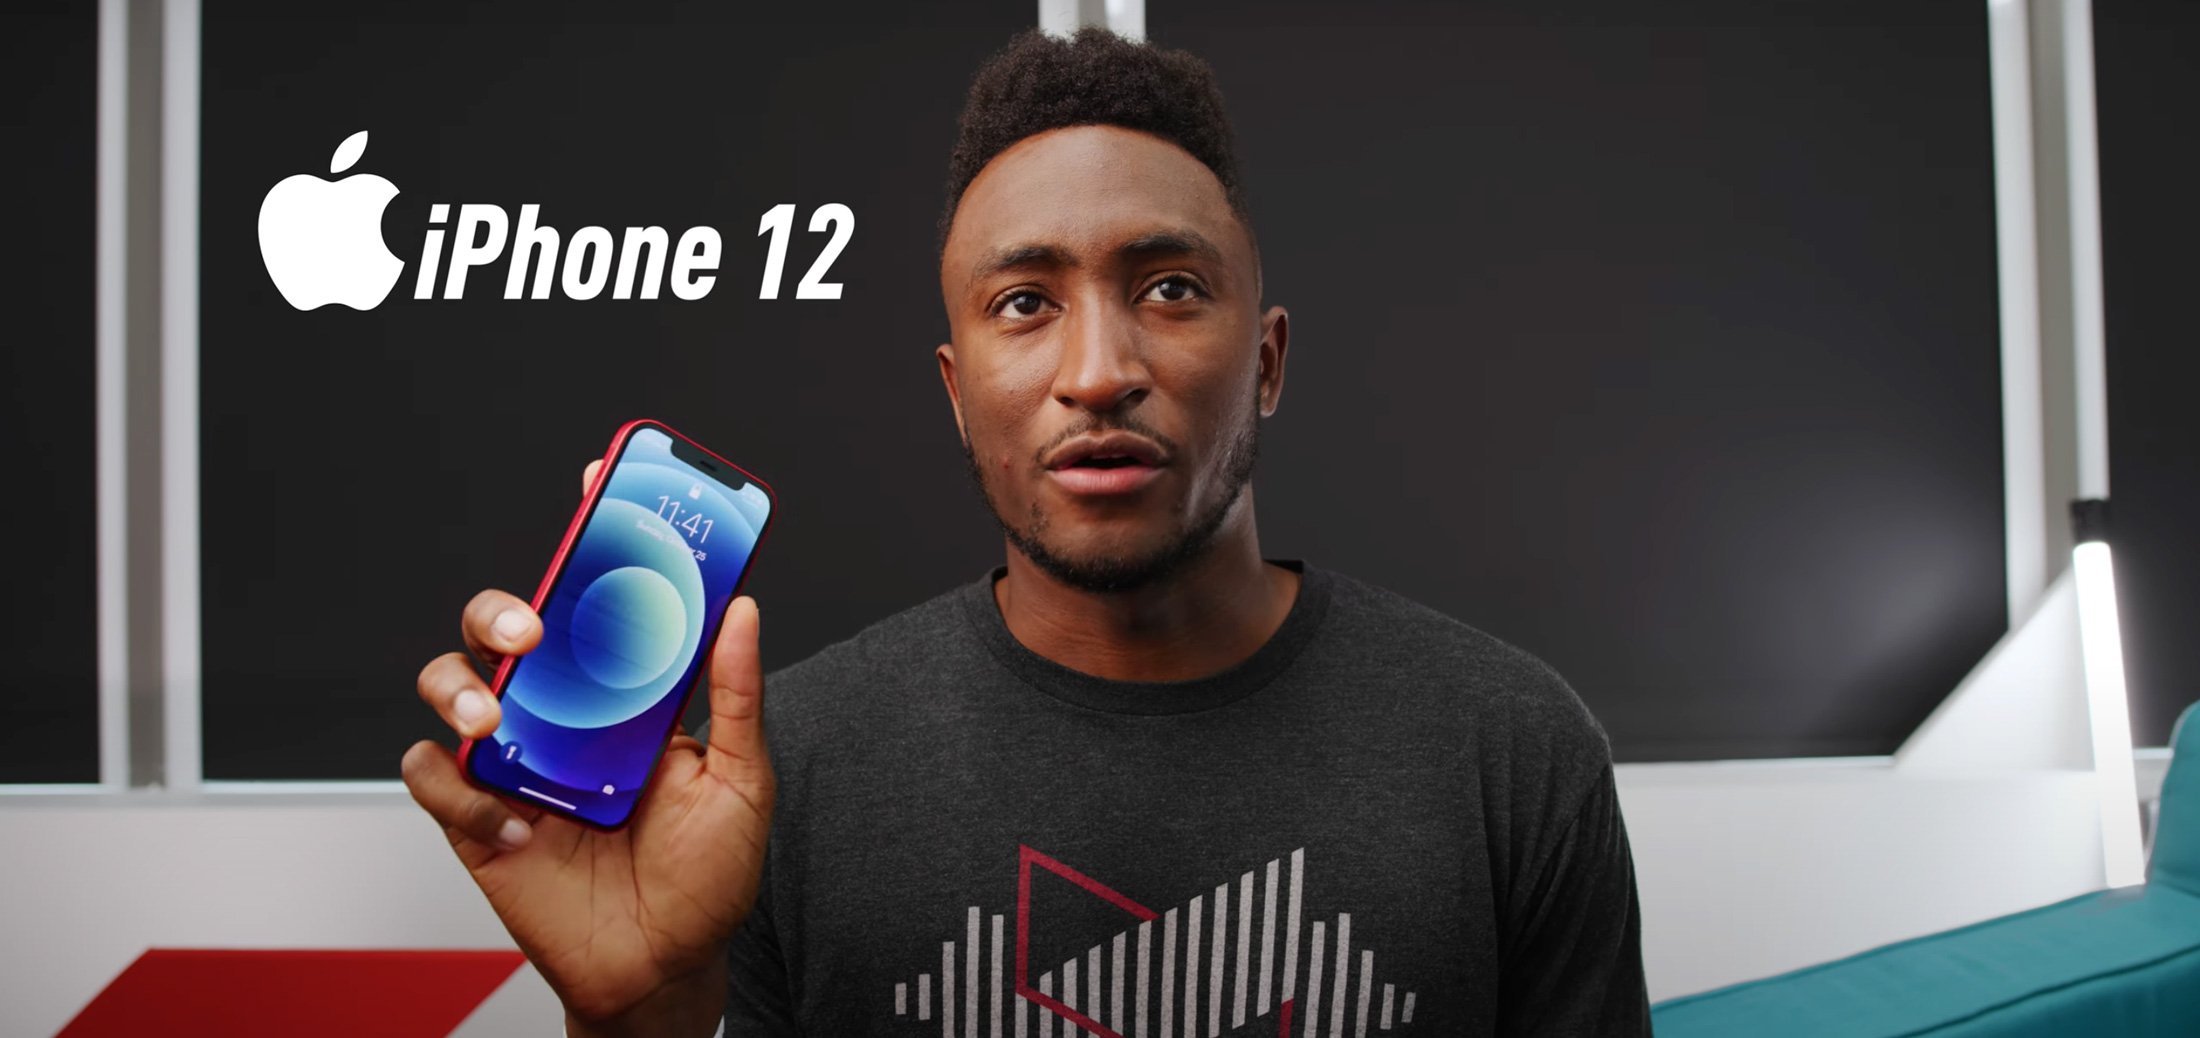 iPhone 12 Review by Marques Brownlee or MKBHD – Shothik